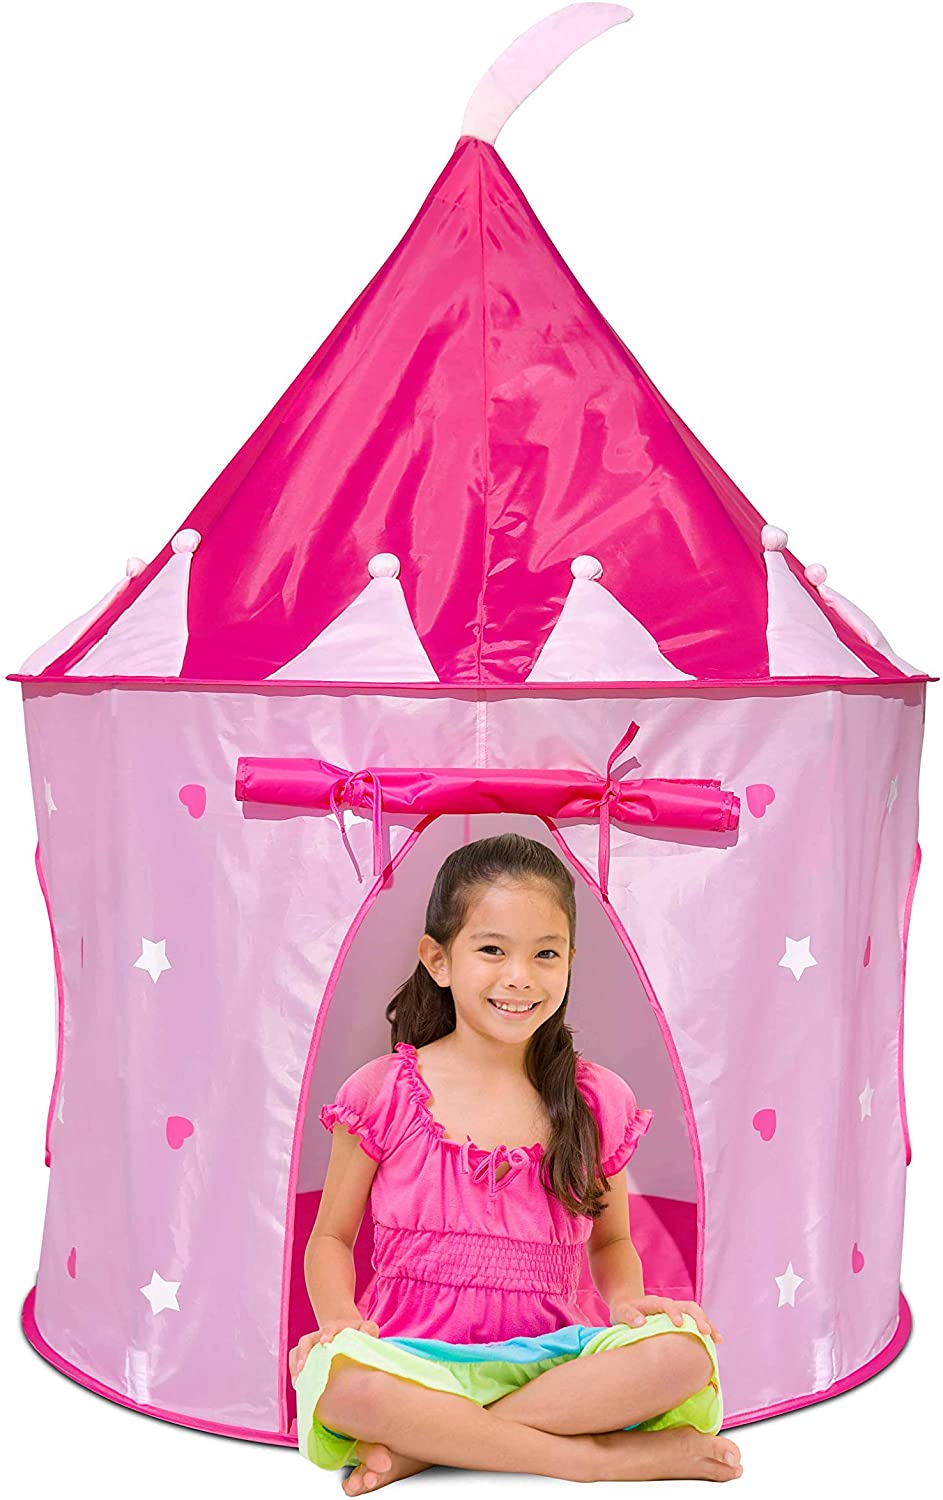 Princess Castle Play Tent With Glow In The Dark Stars Foldable with Carry Case